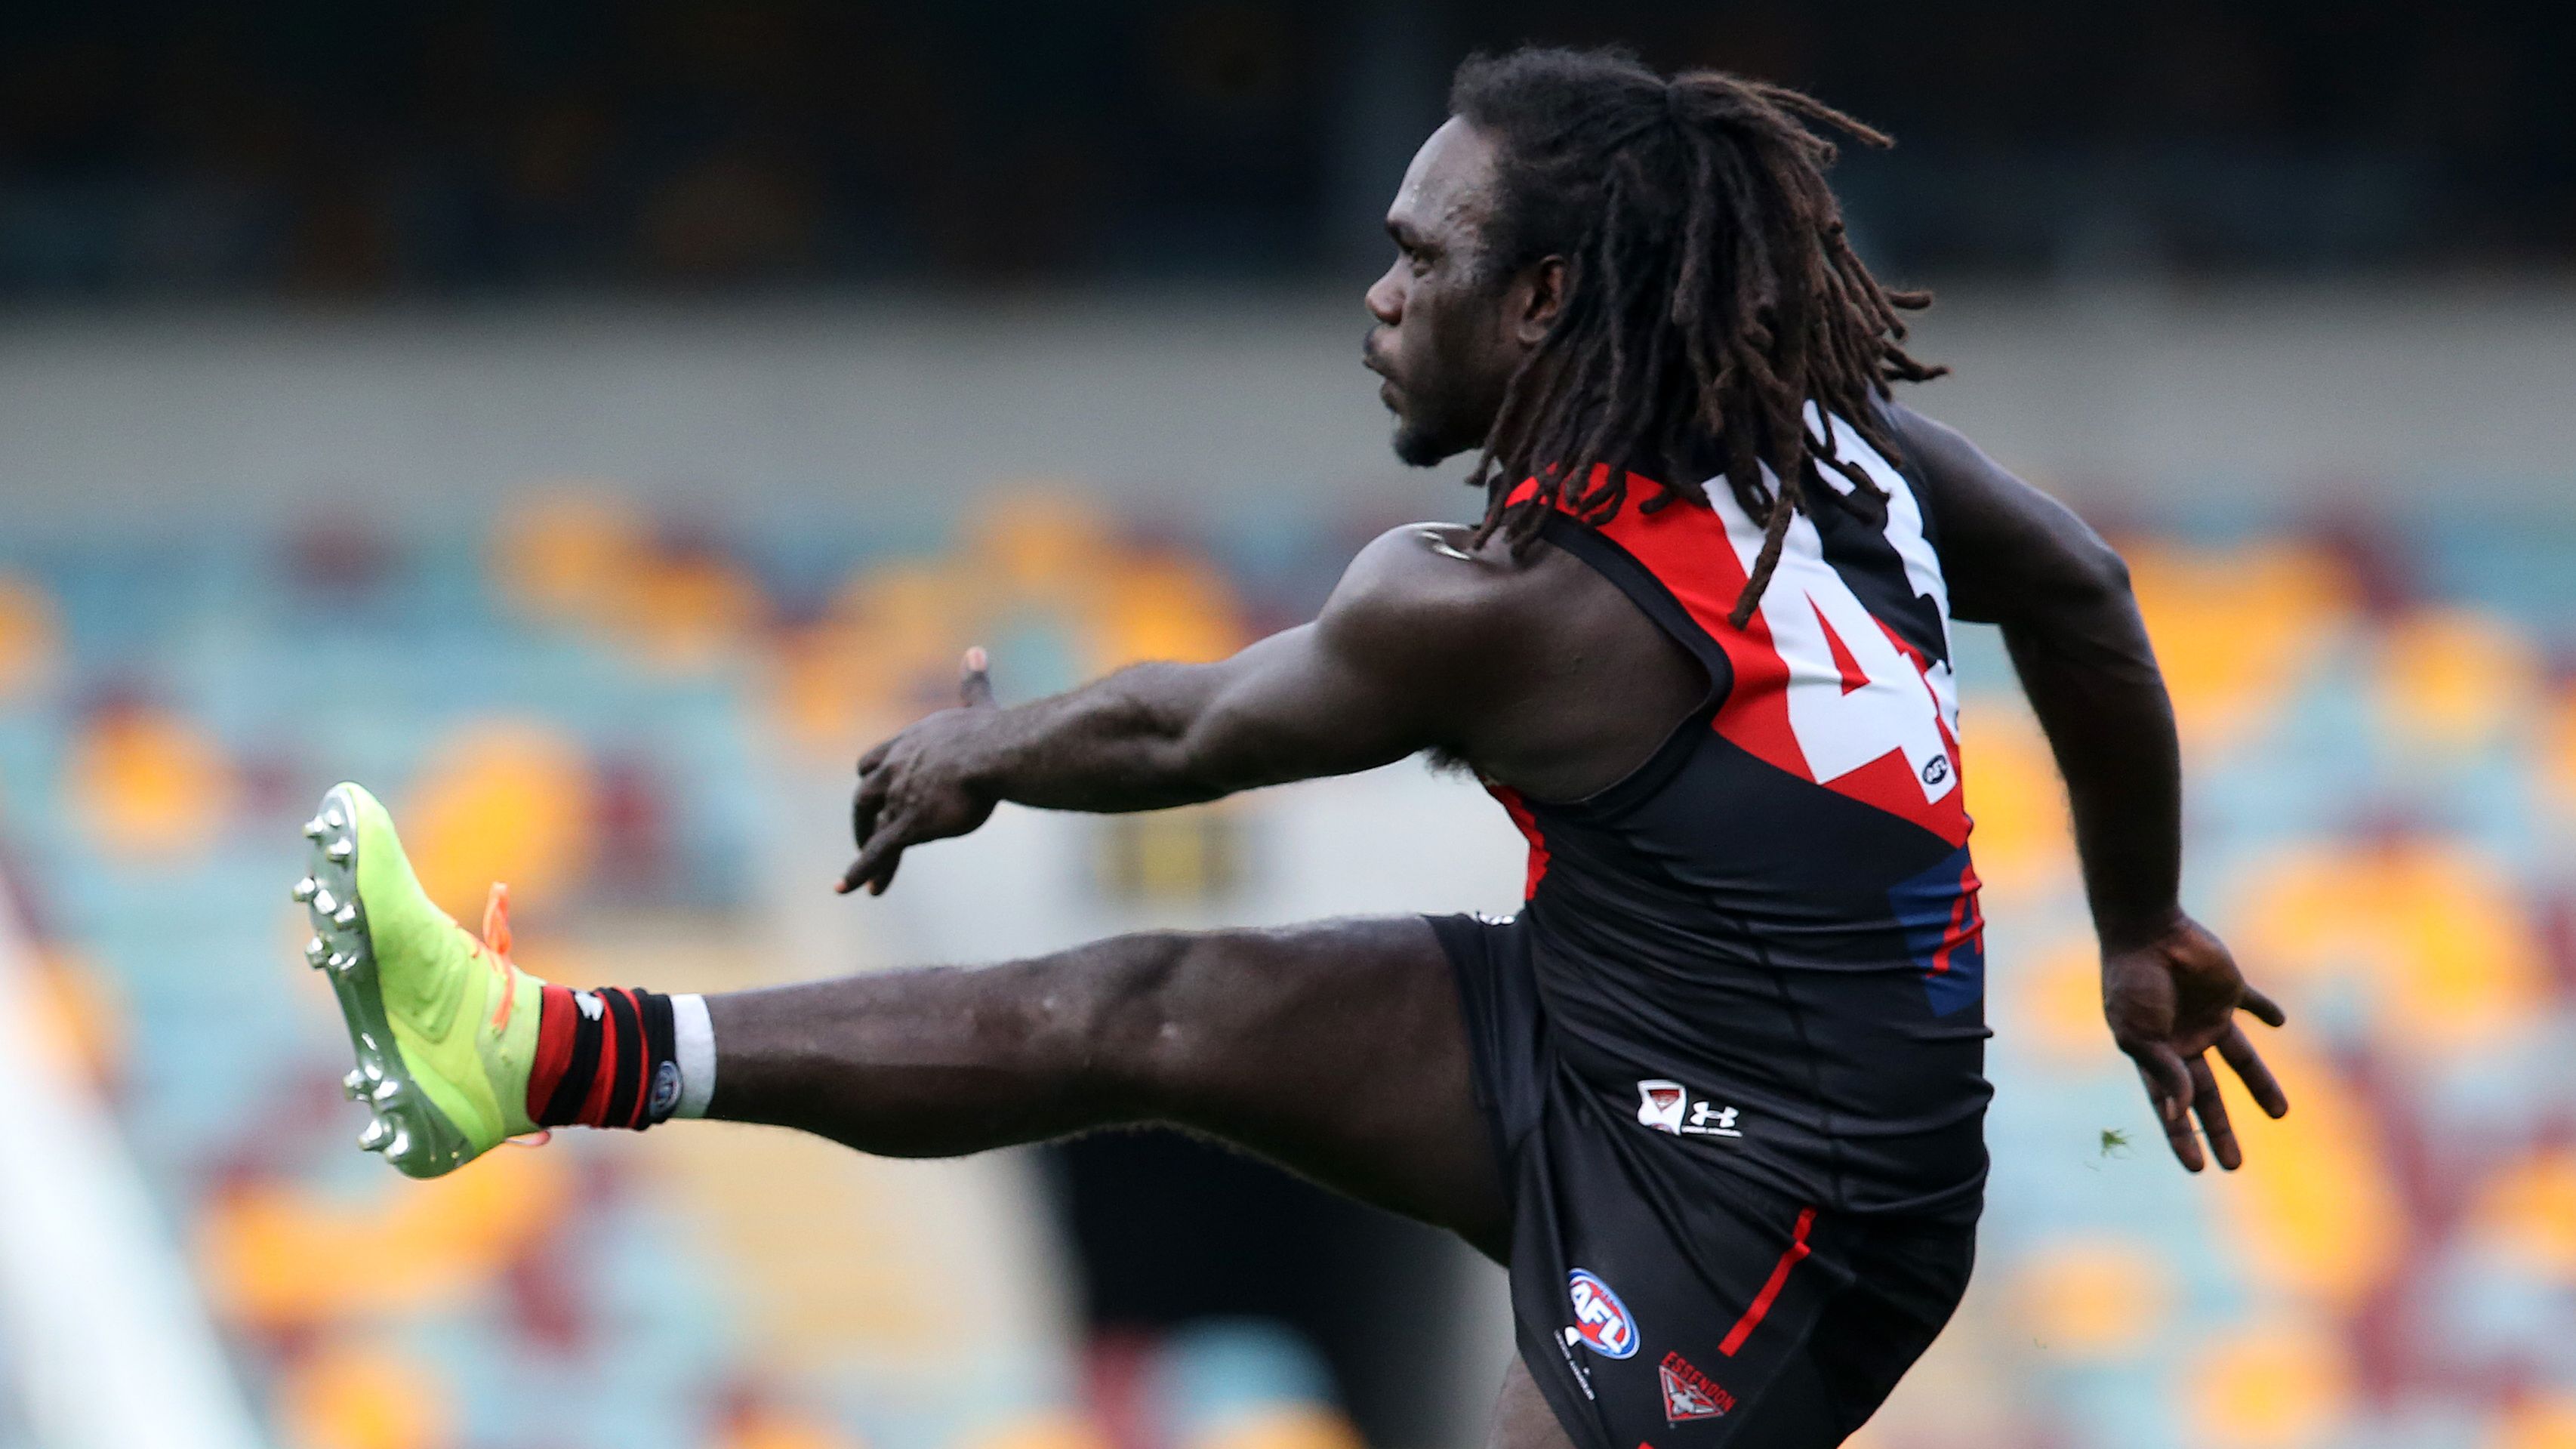 Anthony McDonald-Tipungwuti to take time away from football